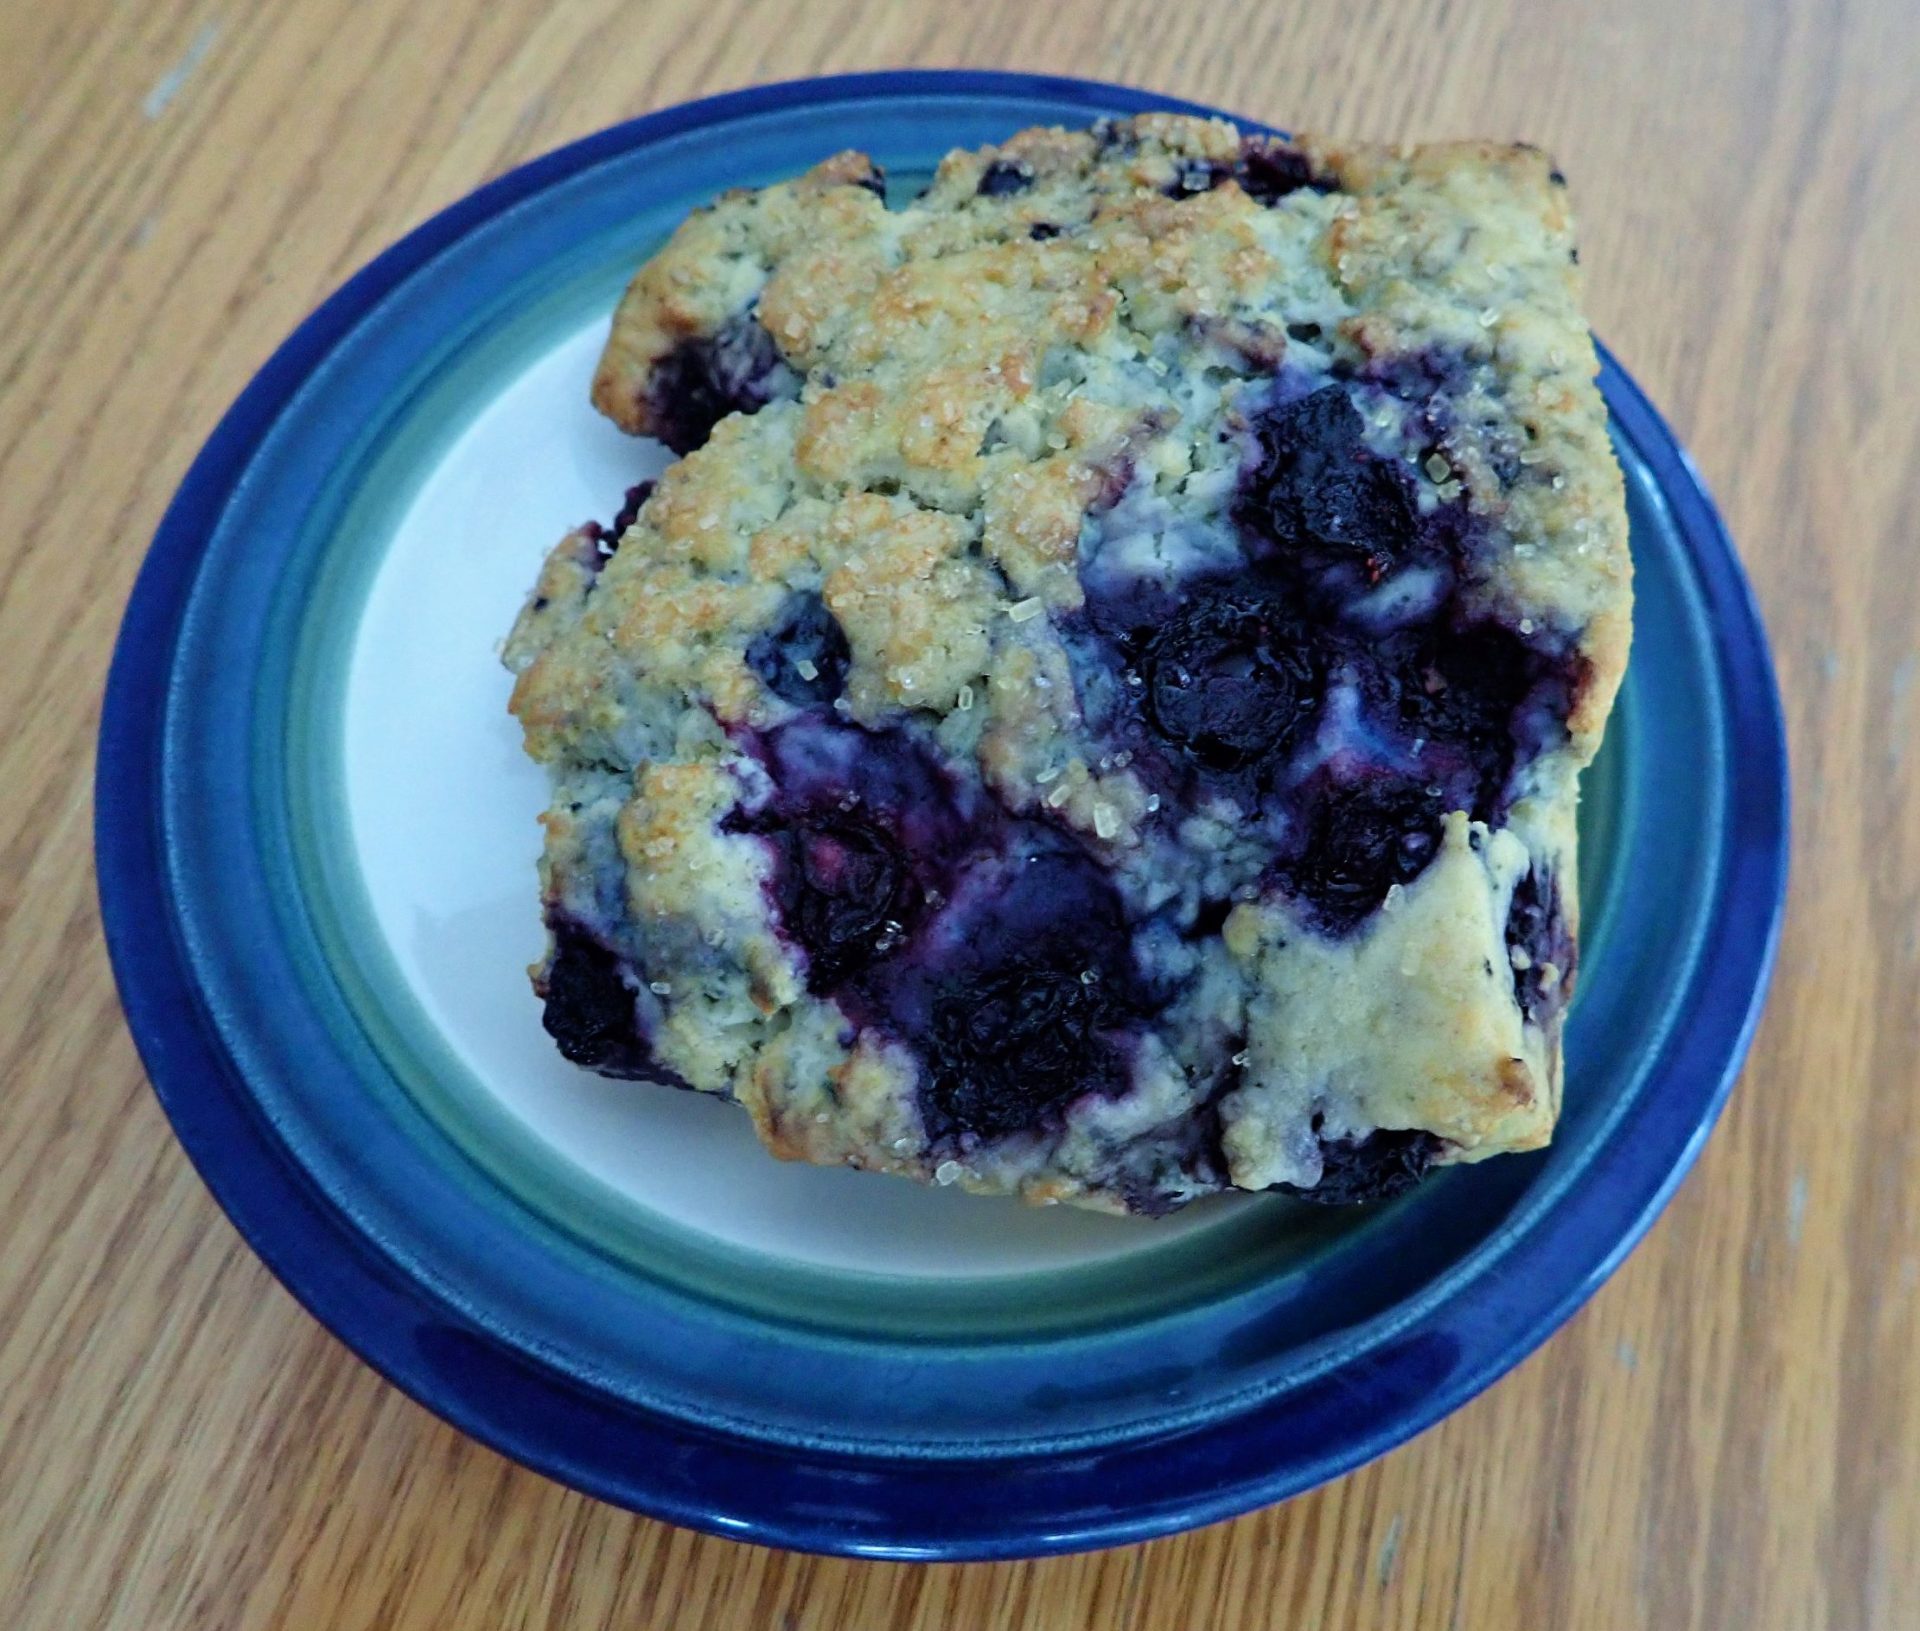 Great Lakes Chocolate and dessert company blueberry scone